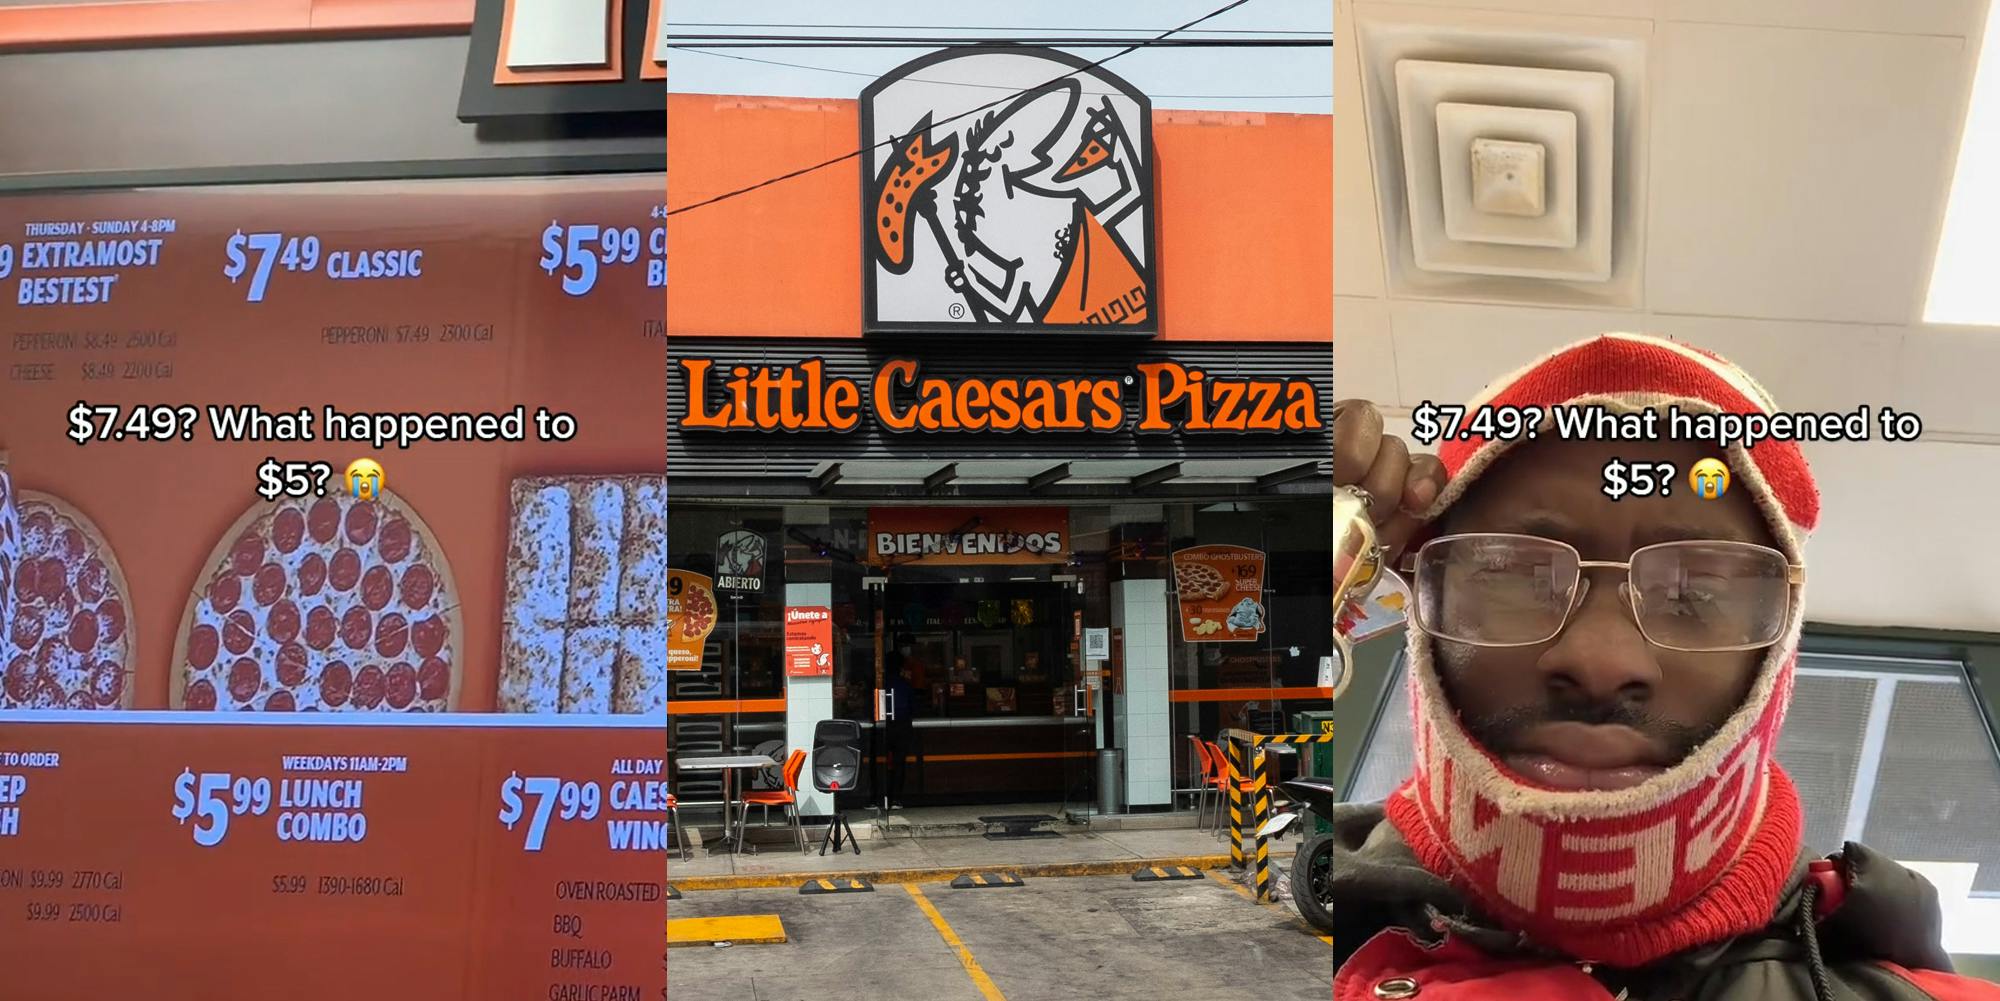 Little Caesar's interior menu with $7.49 for classic with caption "$7.49? What happened to $5?" (l) Little Caesar's sign on building (c) man inside Little Caesar's with caption "$7.49? What happened to $5?" (r)